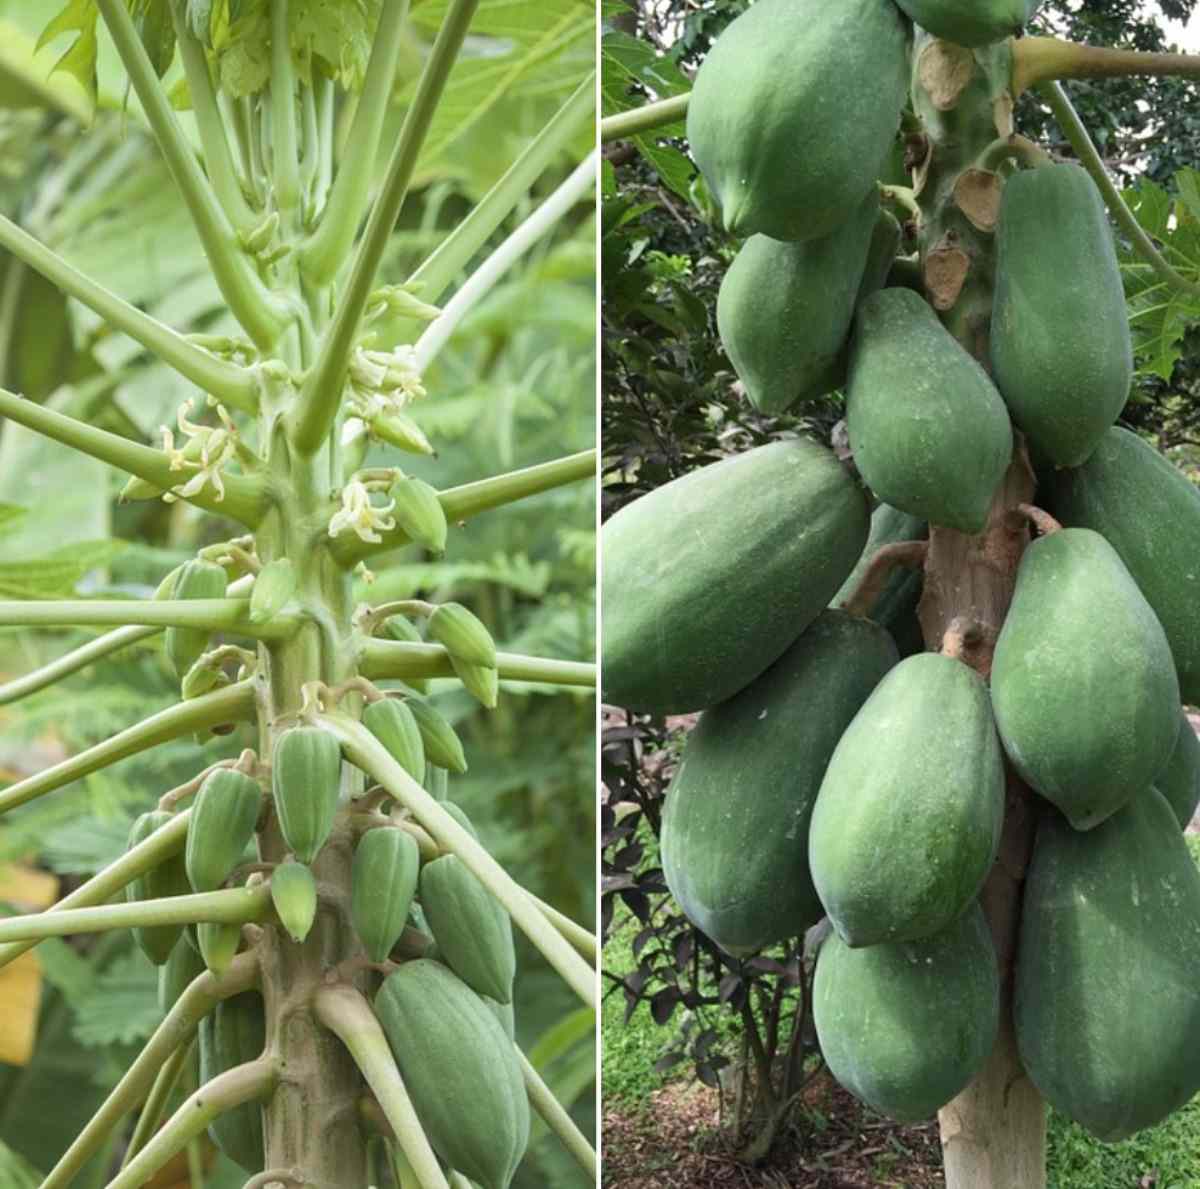 Some Qujestions about Papaya Farming.